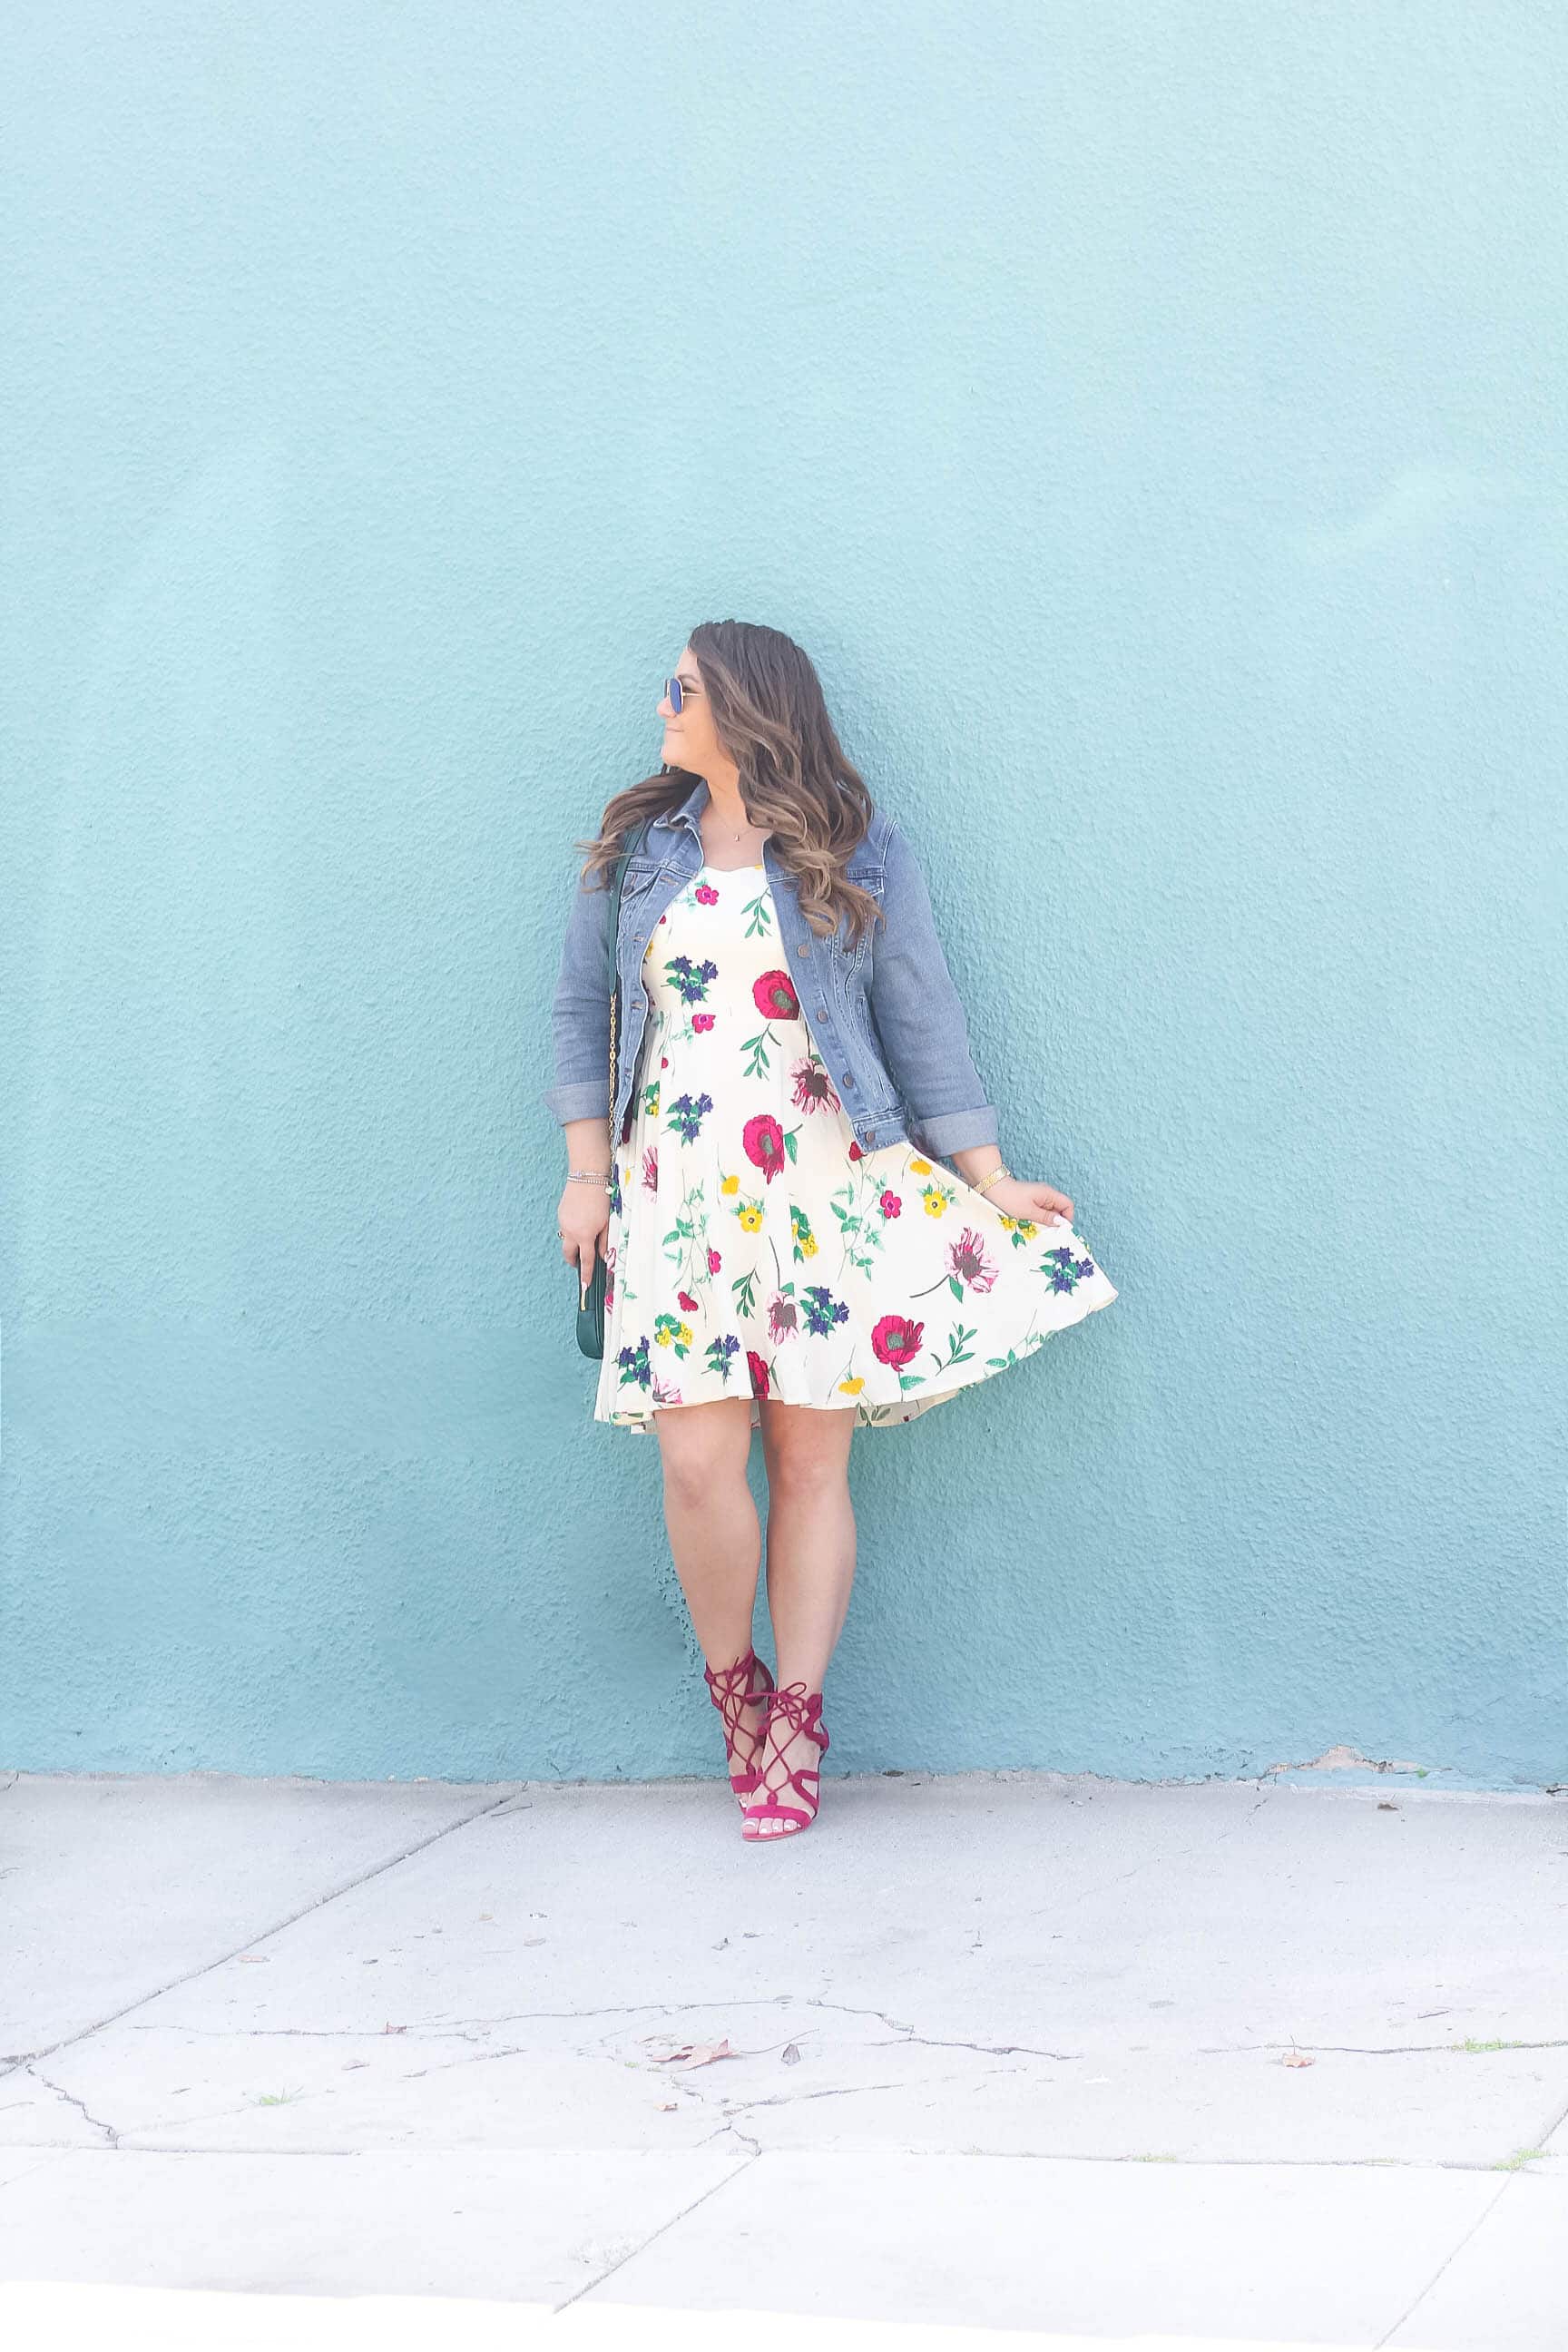 missyonmadison, missyonmadison instagram, melissa tierney, la blogger, style blogger, fashion blogger, fashion goals, outfit inspo, summer style, summer trends, floral dress, floral fit and flare dress, old navy, old navy cami dress, old navy floral dress, old navy denim jacket, denim jacket, raybans, rayban aviators, gianvito rossi, gianvito rossi lace up sandals, lace up sandals, vera bradley, vera bradley cross body bag, vera bradley emerald cross bodybag, curled hair, hair extensions, beauty blogger, outfits under $50,